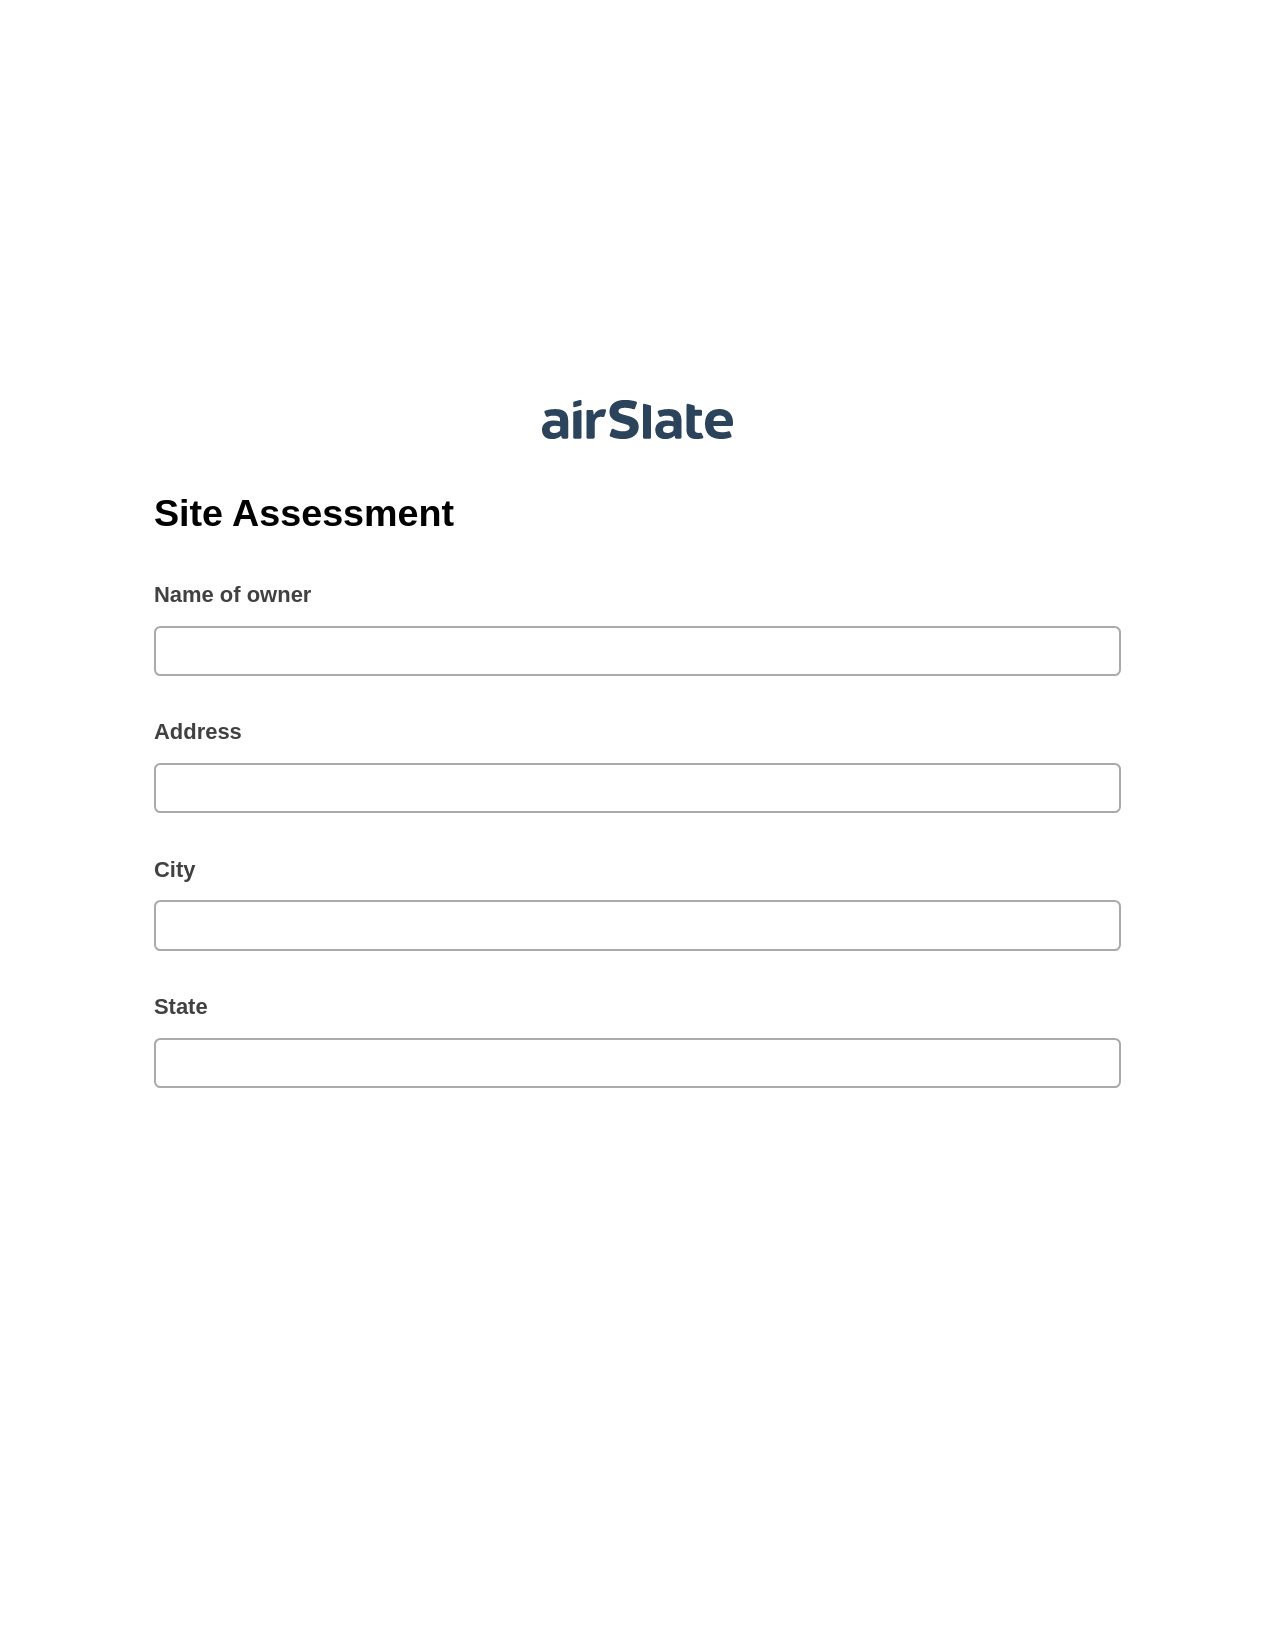 Site Assessment Pre-fill from Salesforce Record Bot, Create Slate from another Flow Bot, Export to MySQL Bot